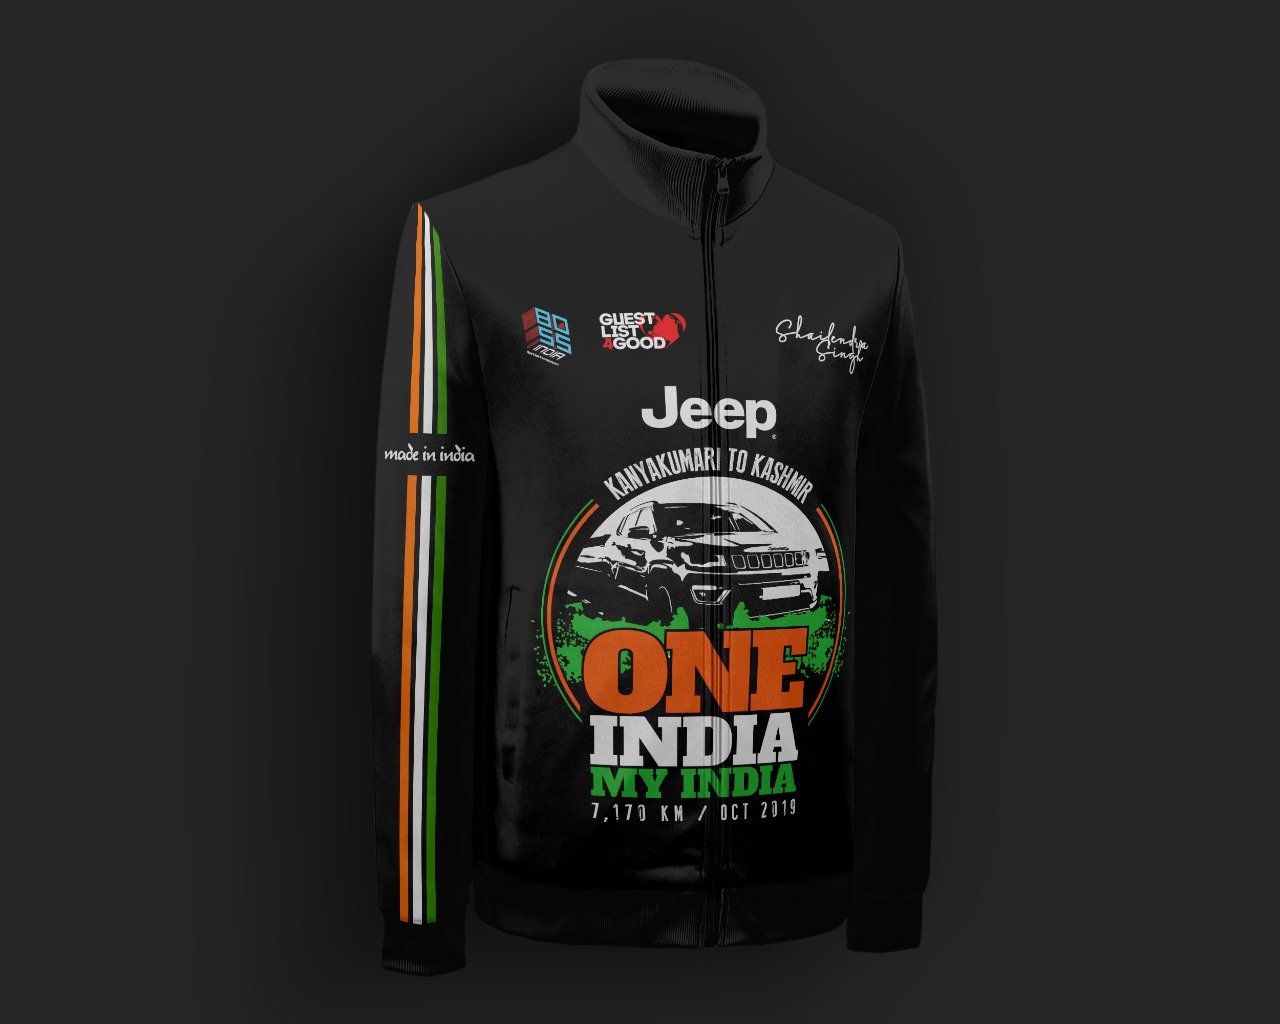 One India shirt front